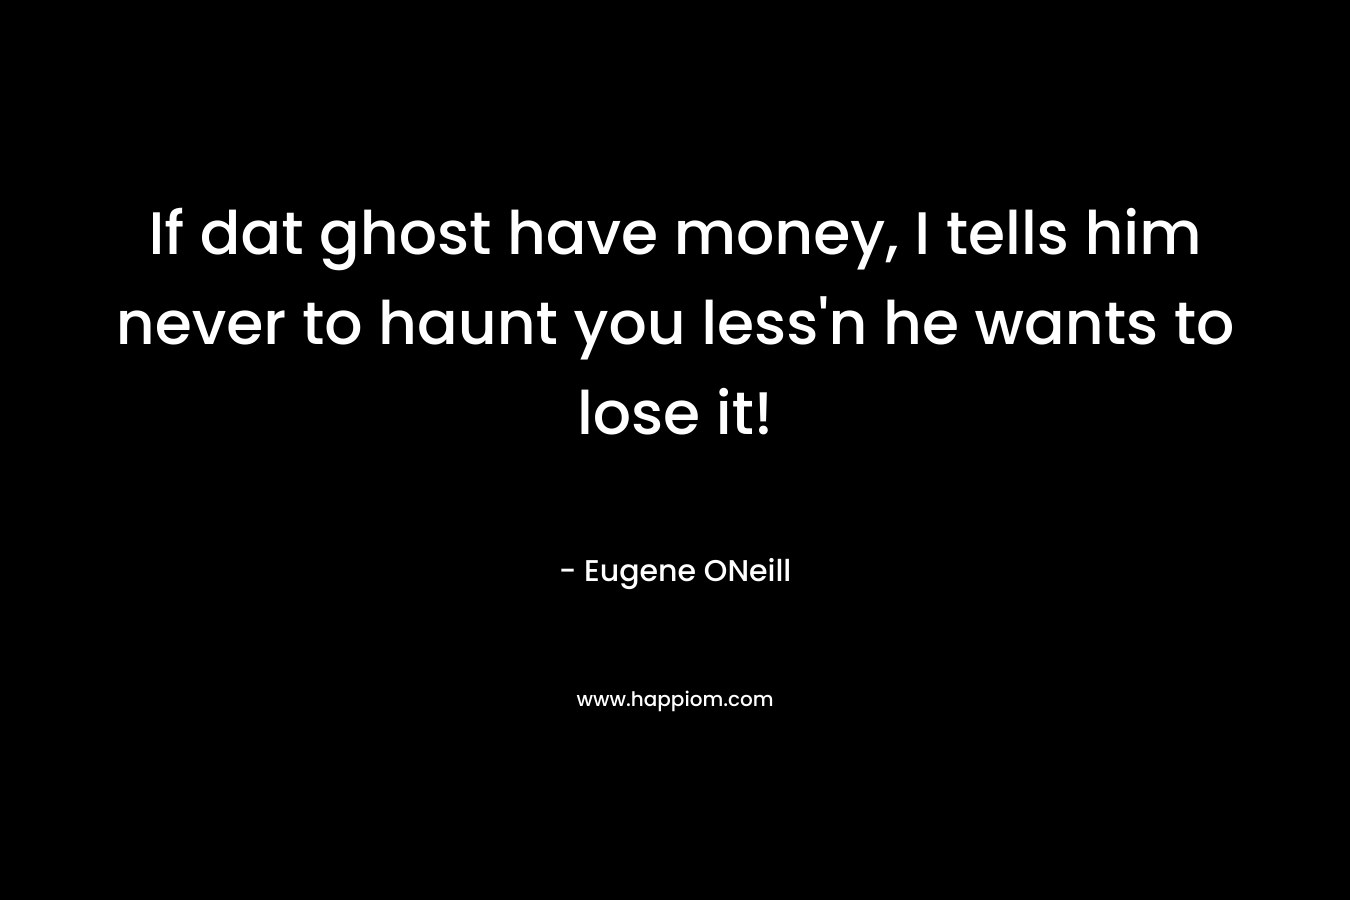 If dat ghost have money, I tells him never to haunt you less’n he wants to lose it! – Eugene ONeill